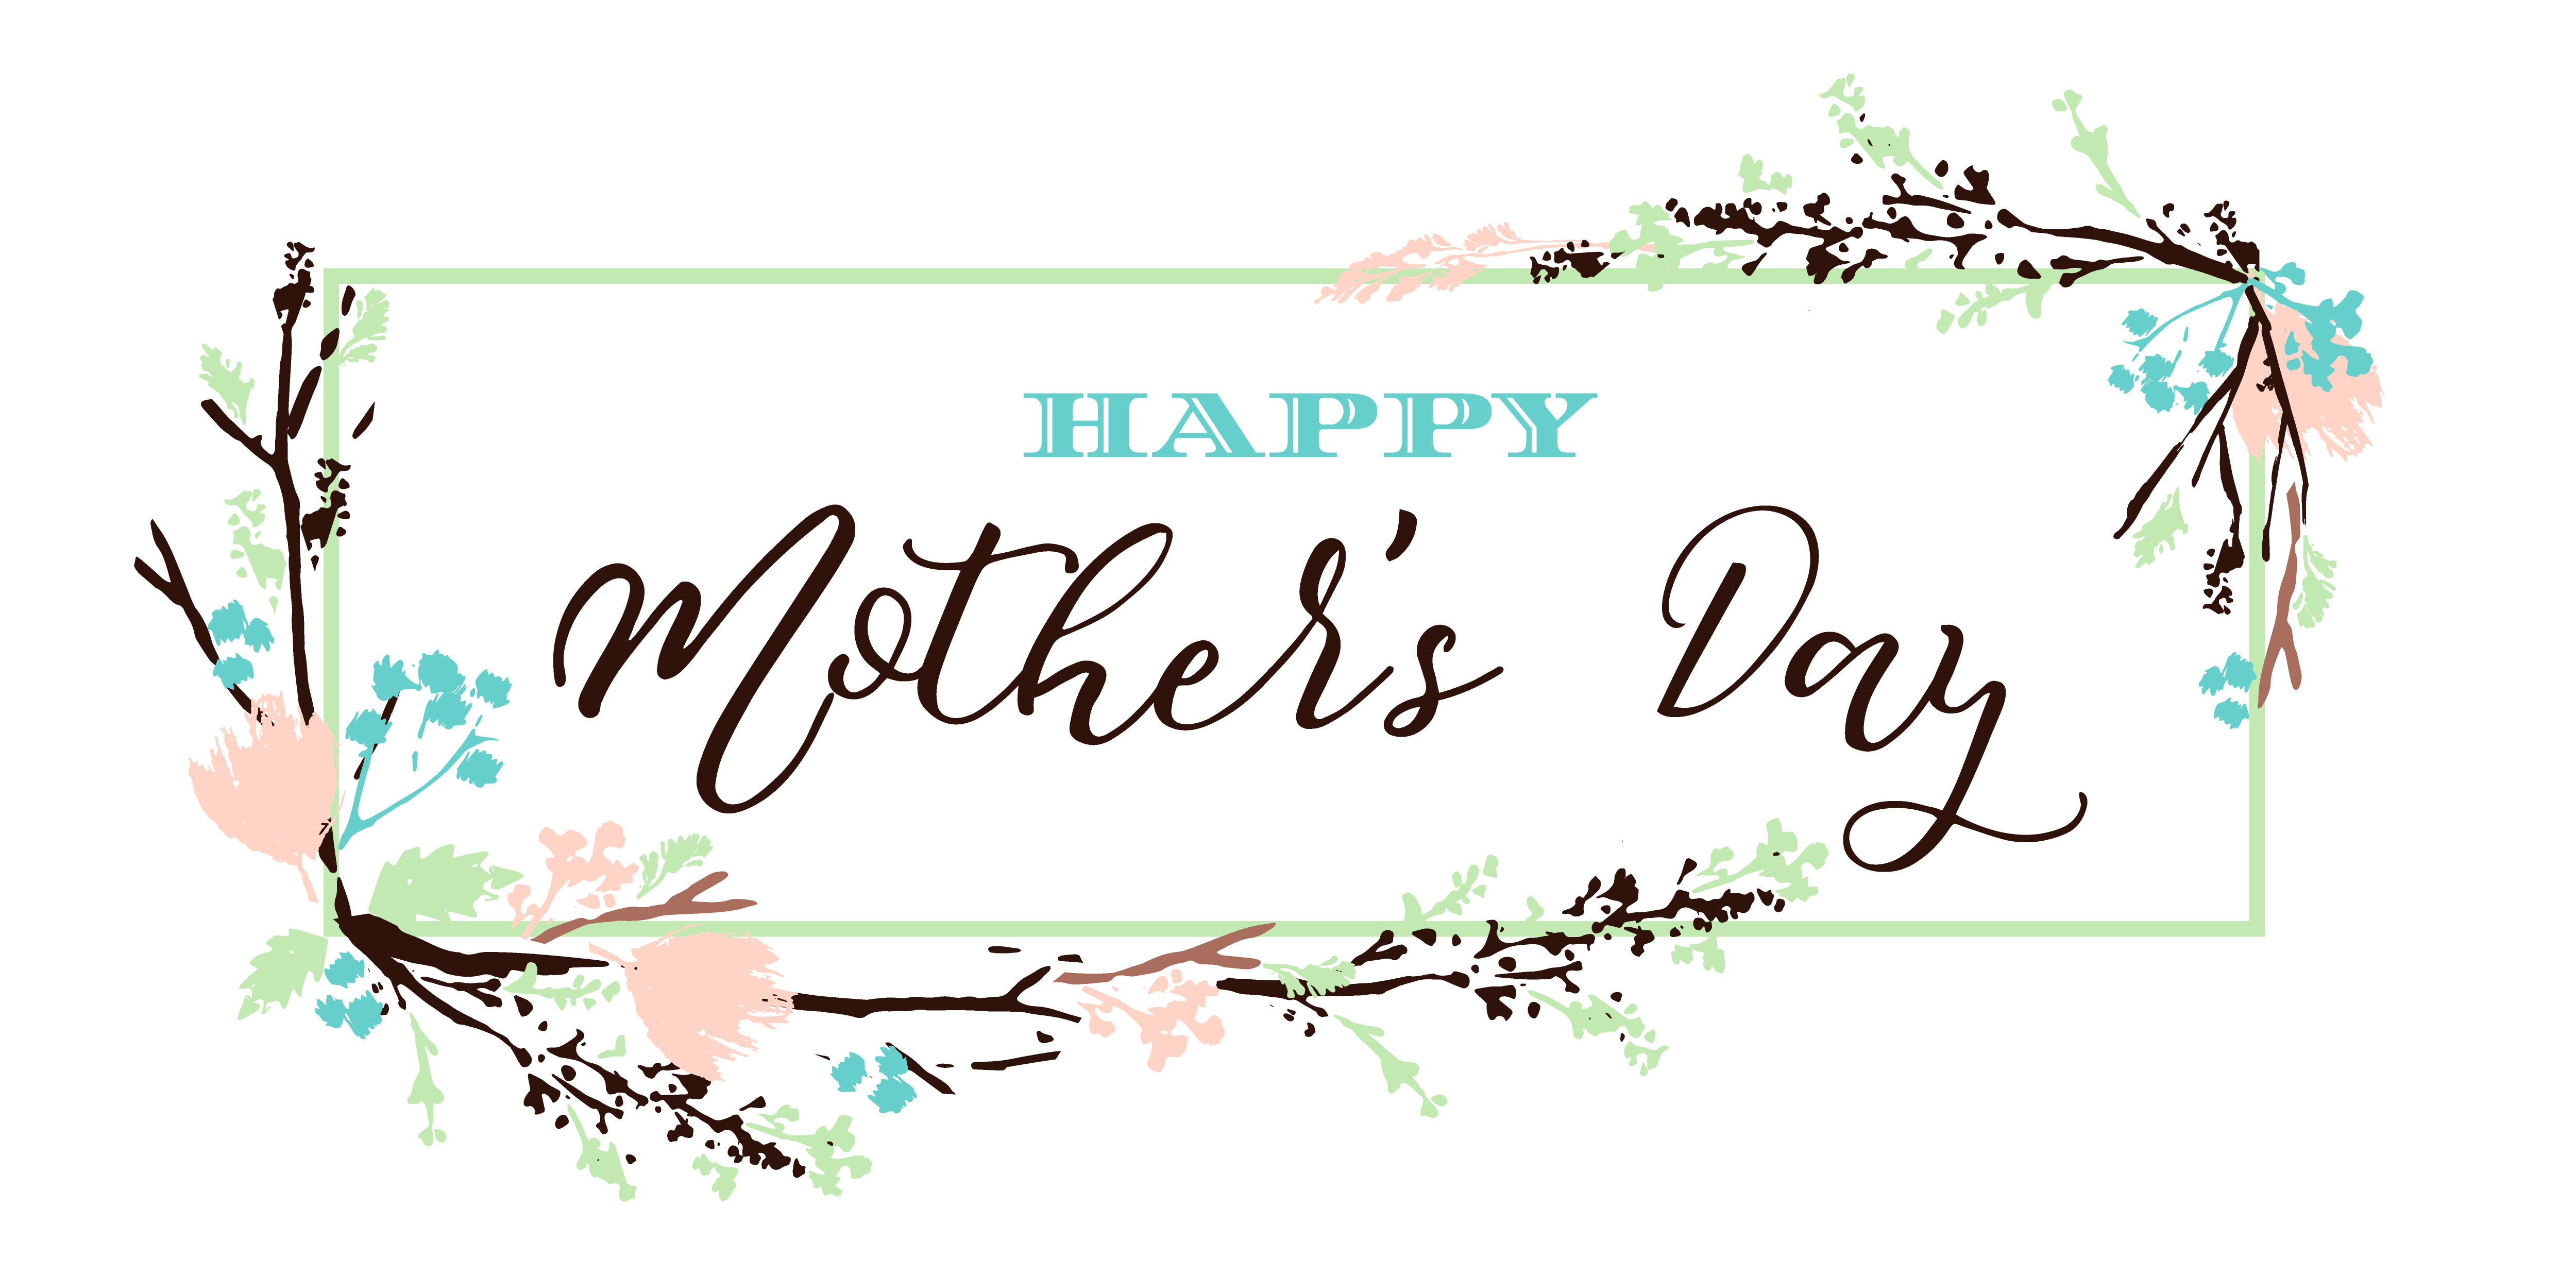  Happy  Mothers  Day  lettering greeting banner  with Flowers 304502 